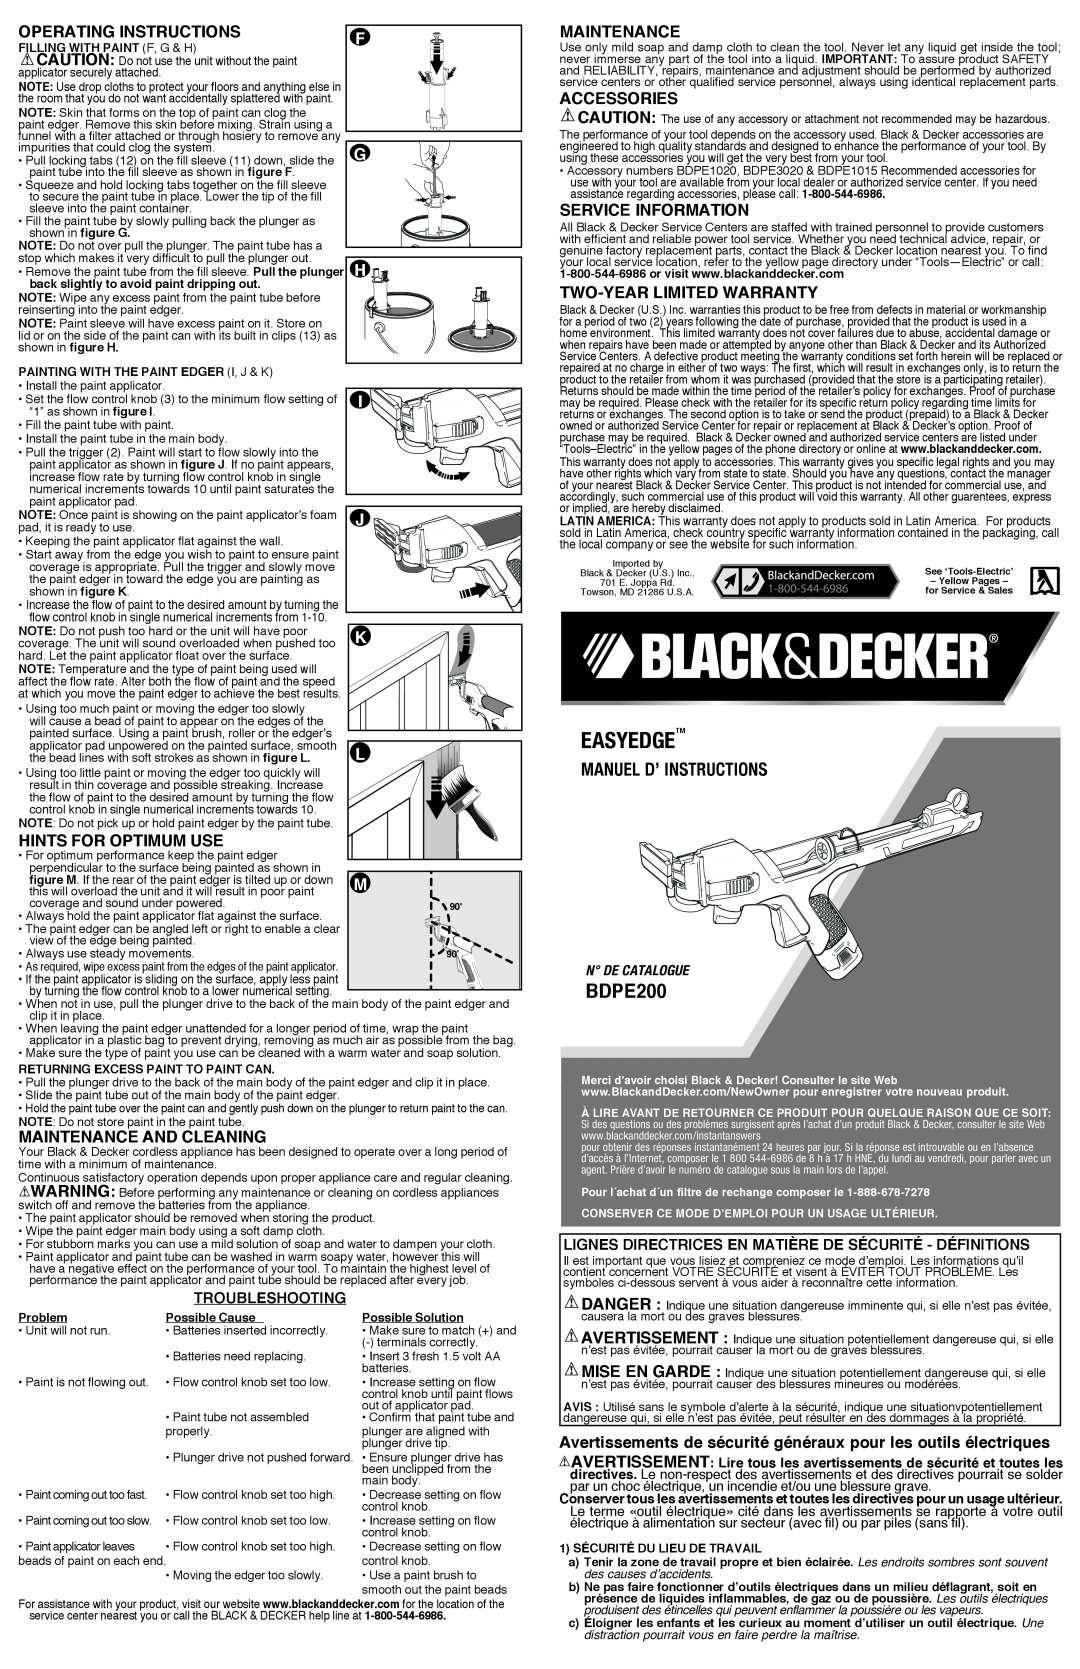 Black & Decker BDPE200B EasyEdgeTM, Operating Instructions, Hints for optimum use, Maintenance and cleaning, Accessories 